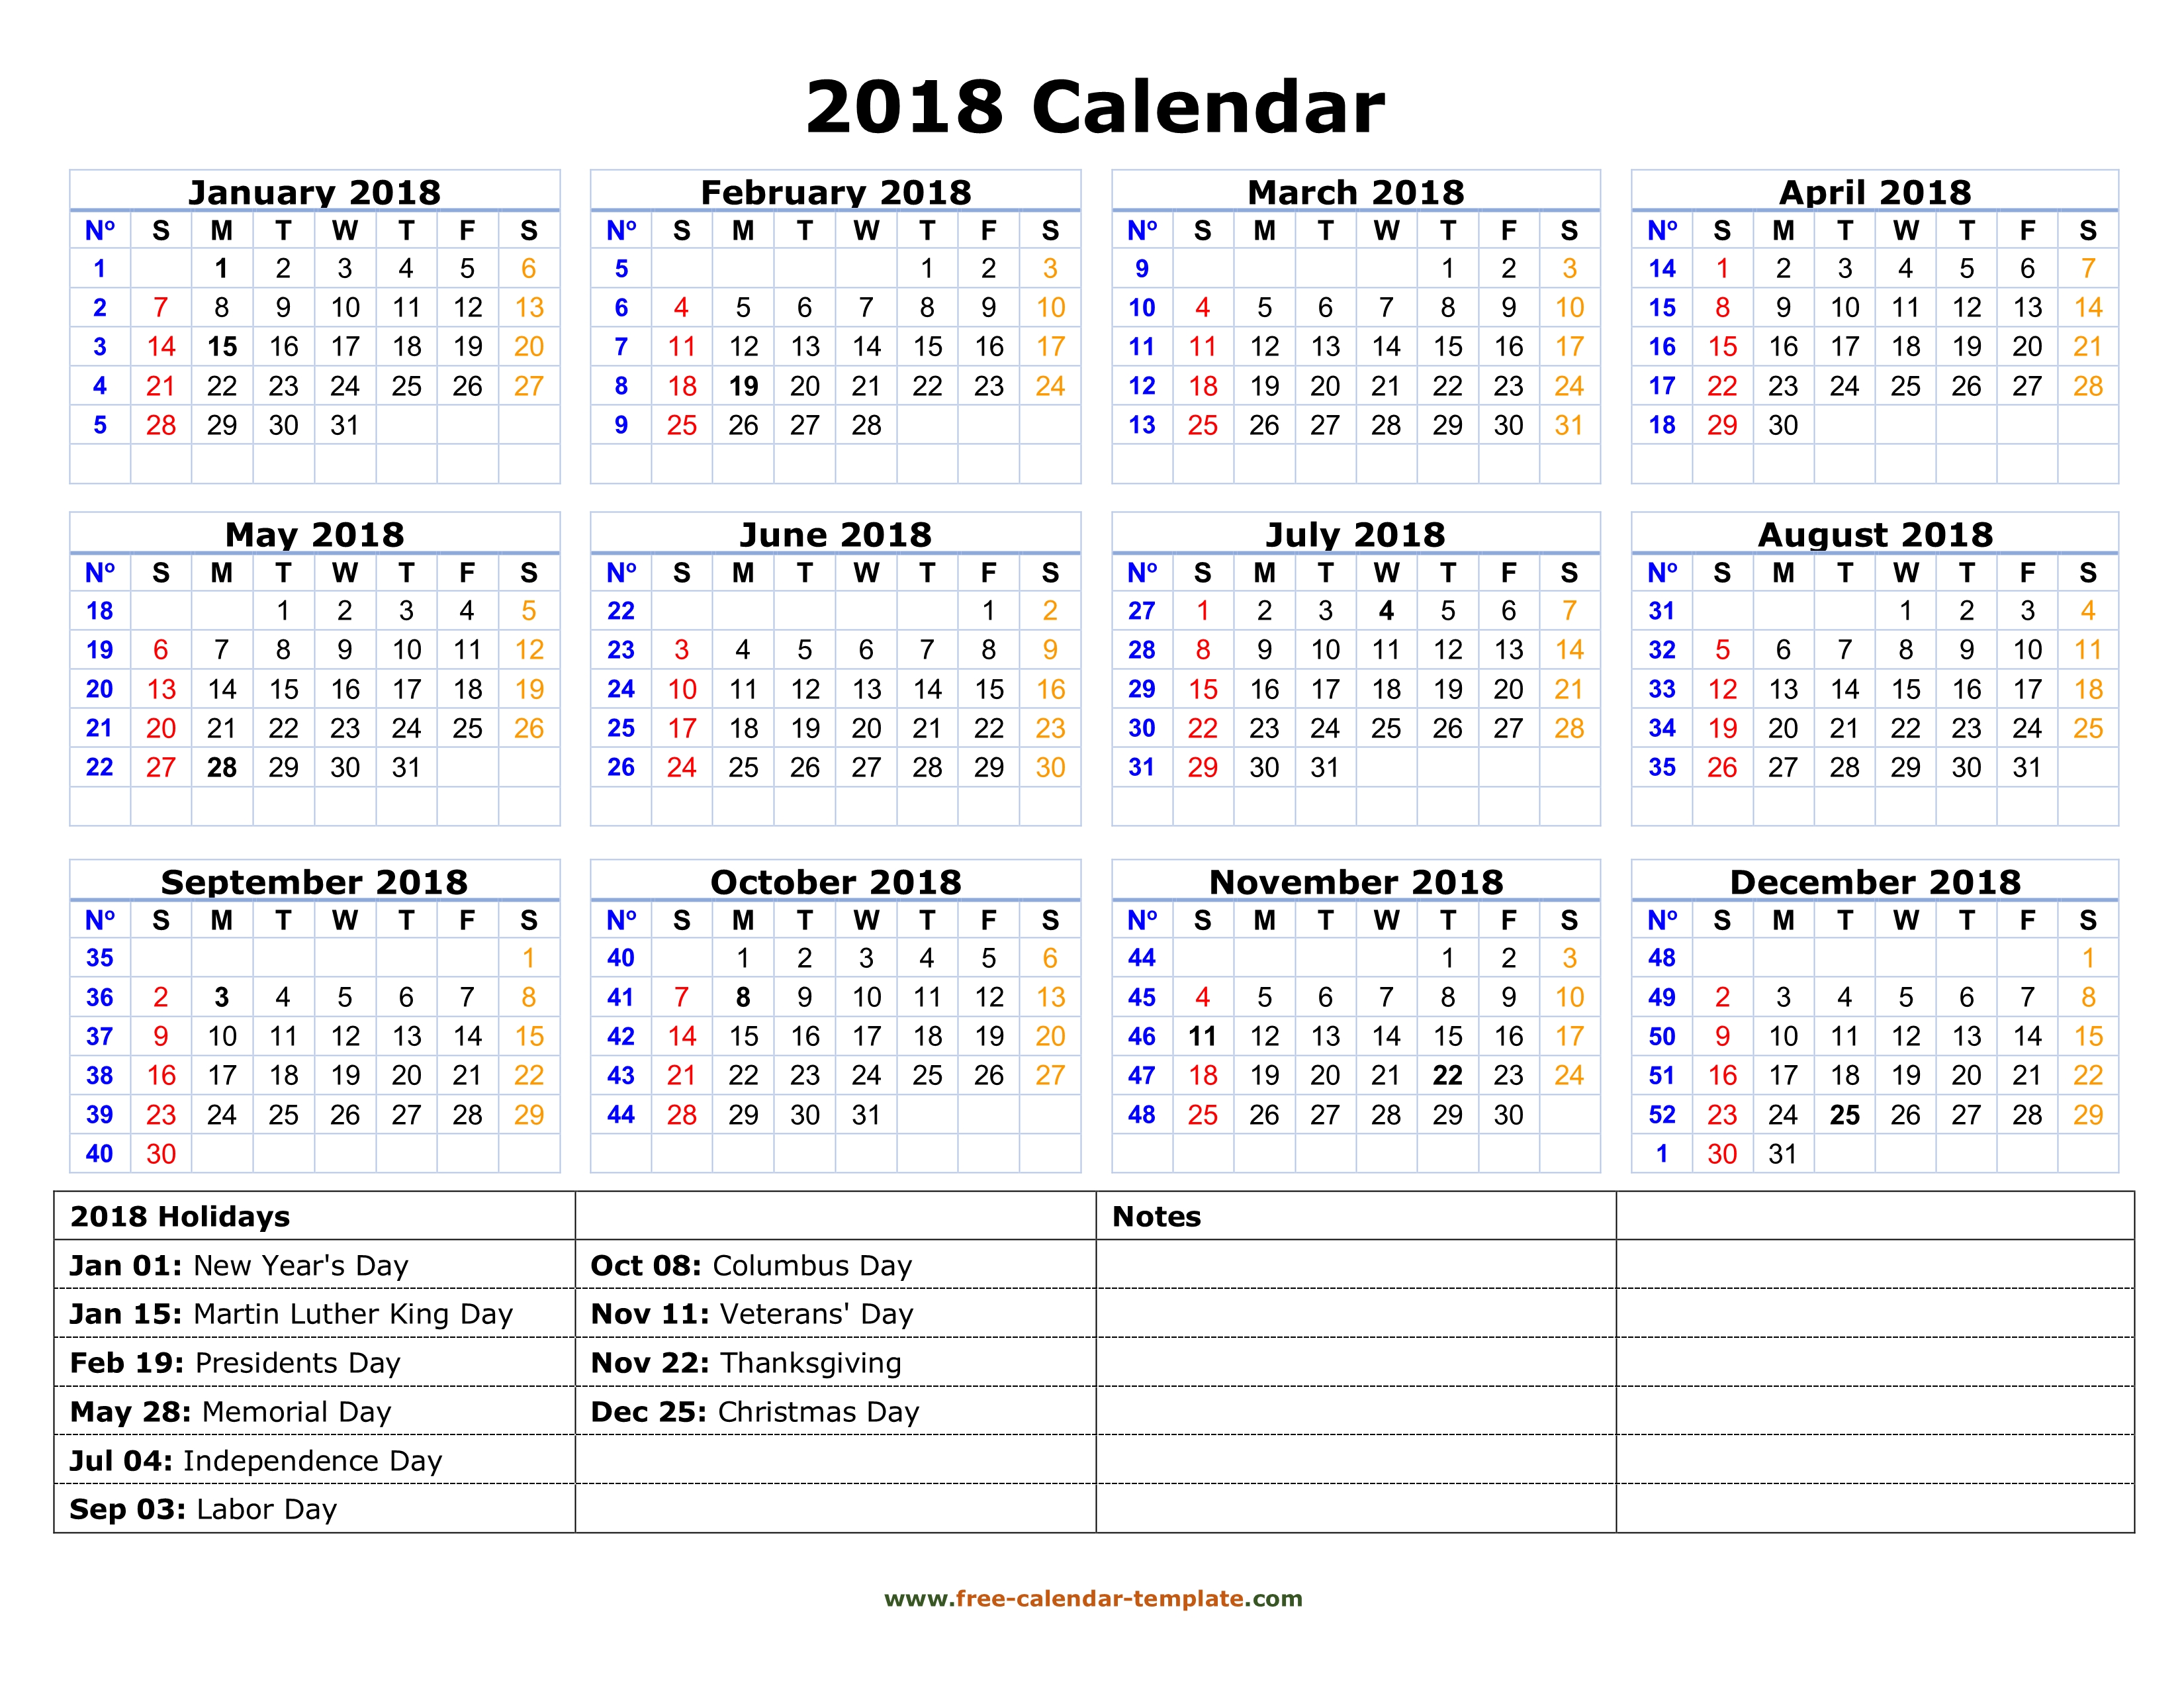 printable-yearly-calendar-2018-with-us-holidays-free-calendar-template